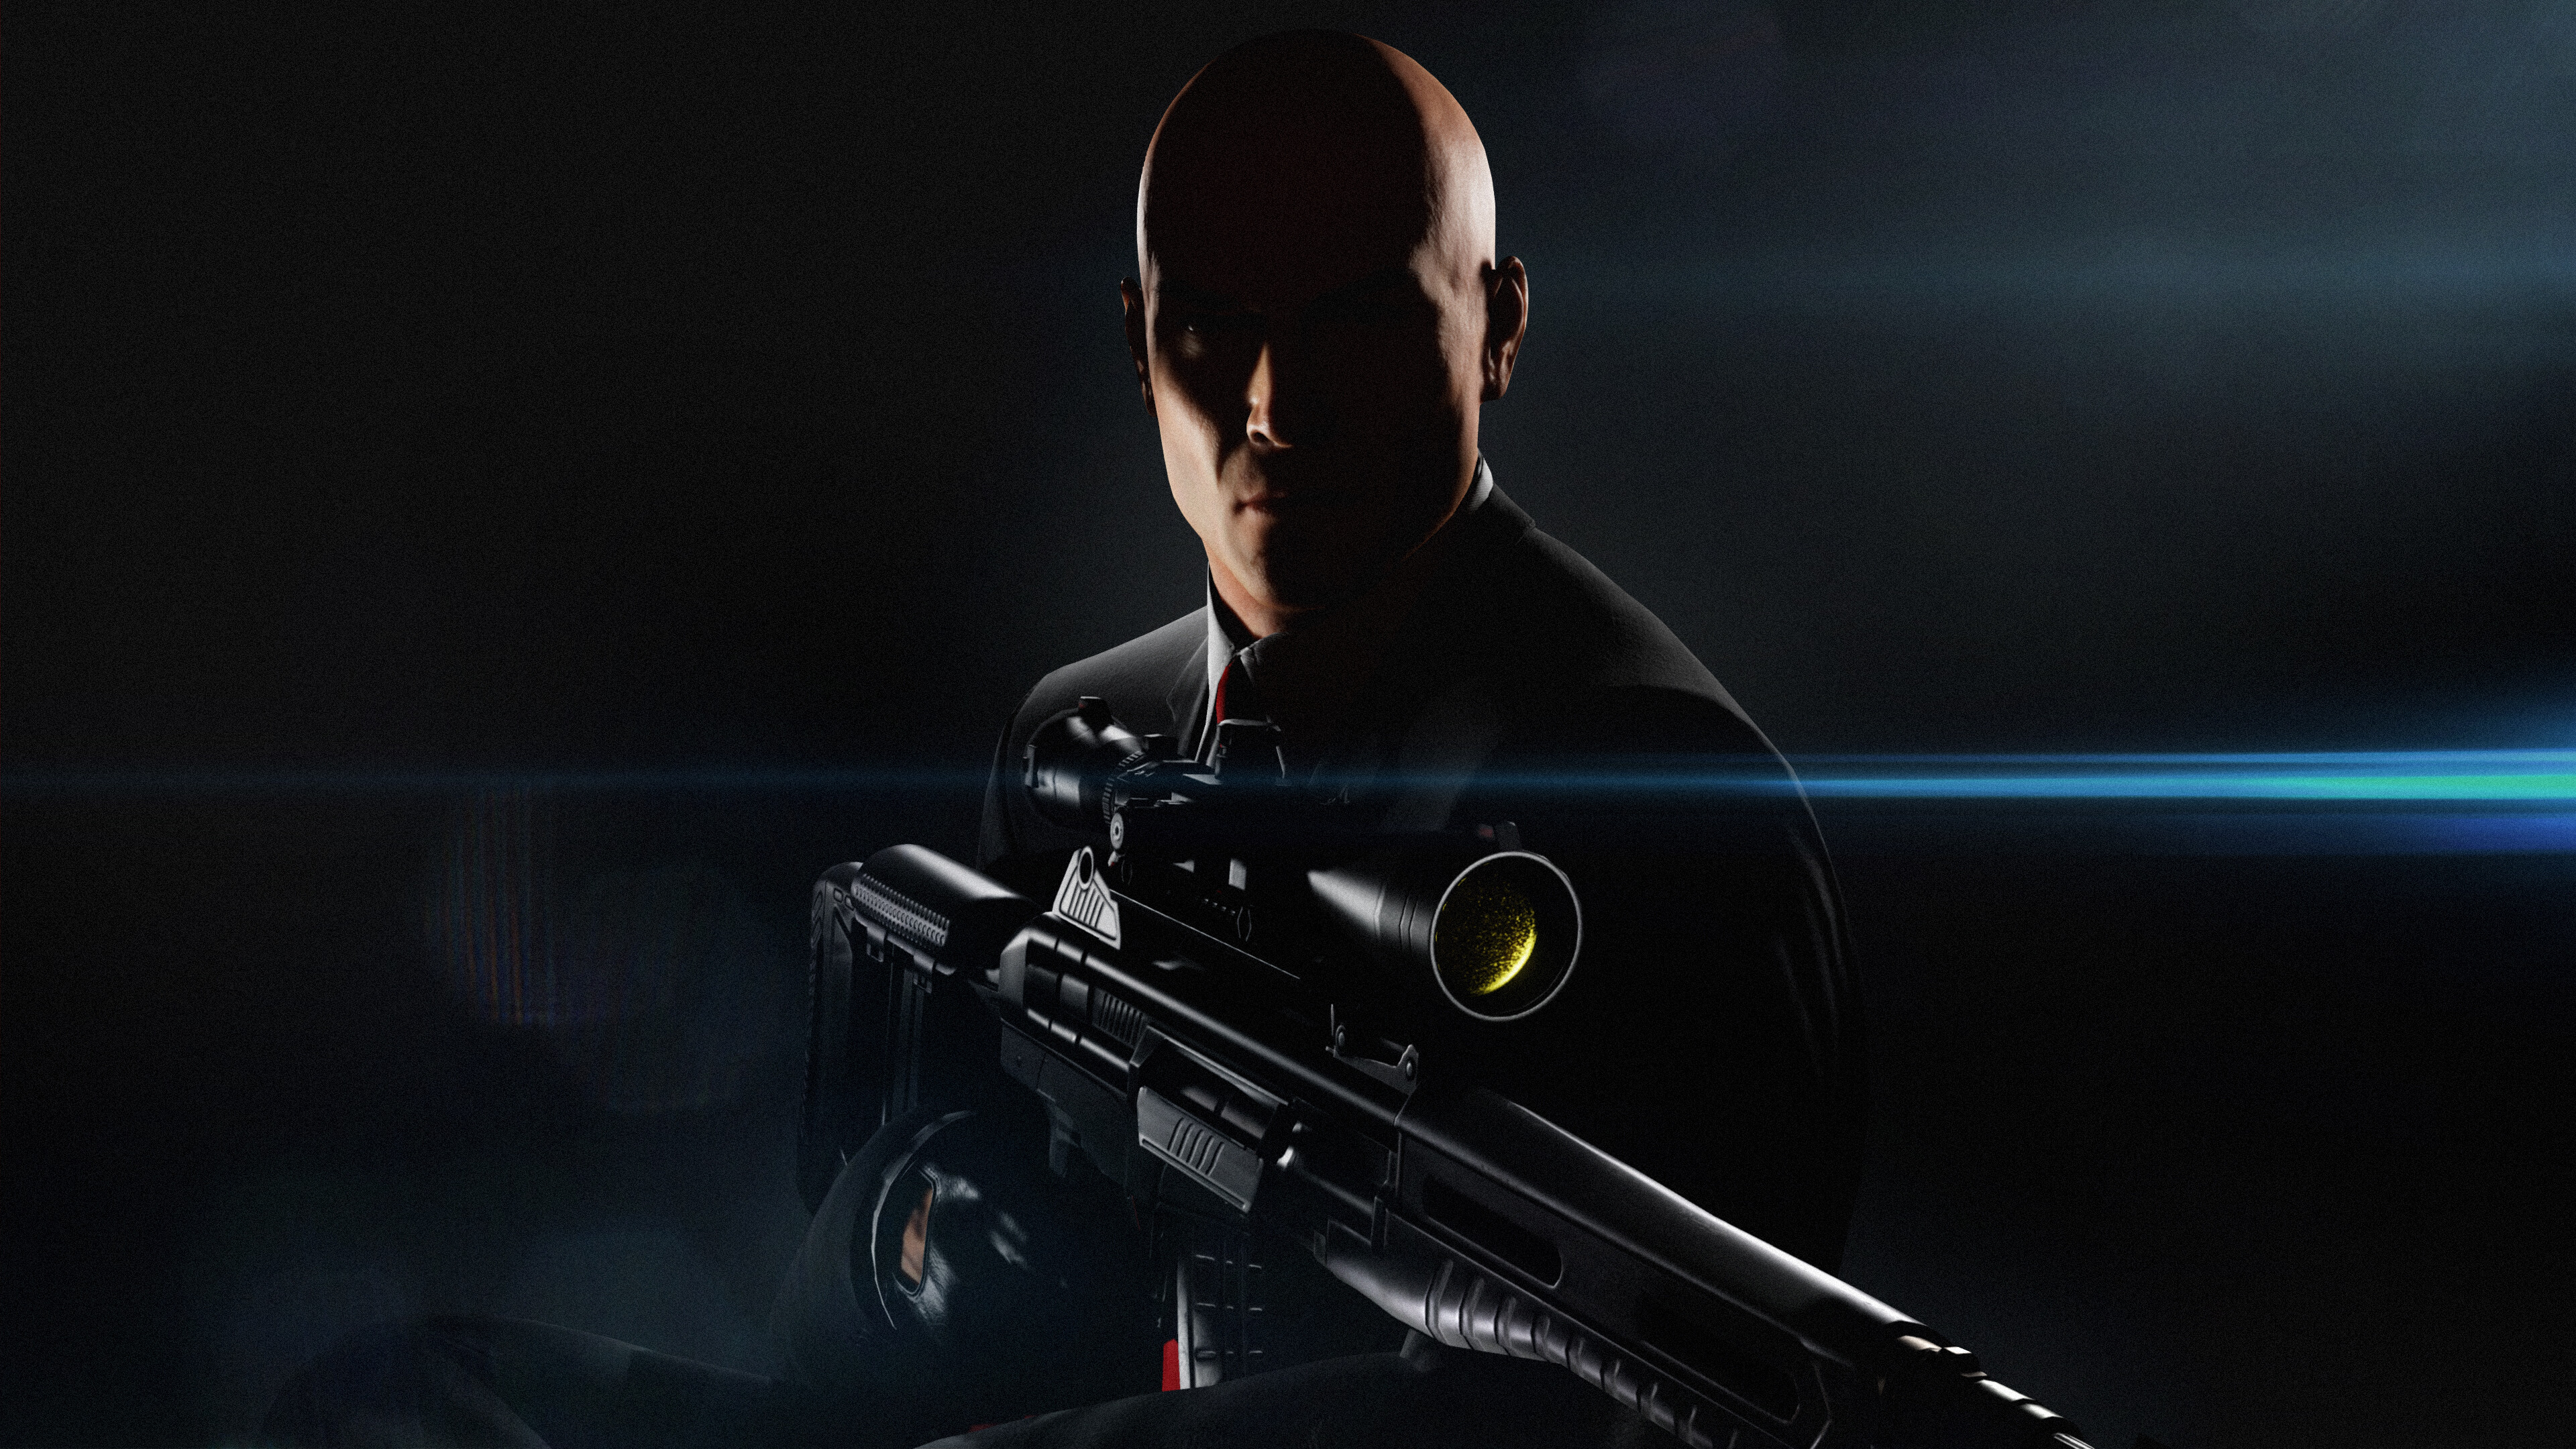 Hitman (Game): Agent 47, or simply known as 47, Voiced by David Bateson. 3840x2160 4K Wallpaper.